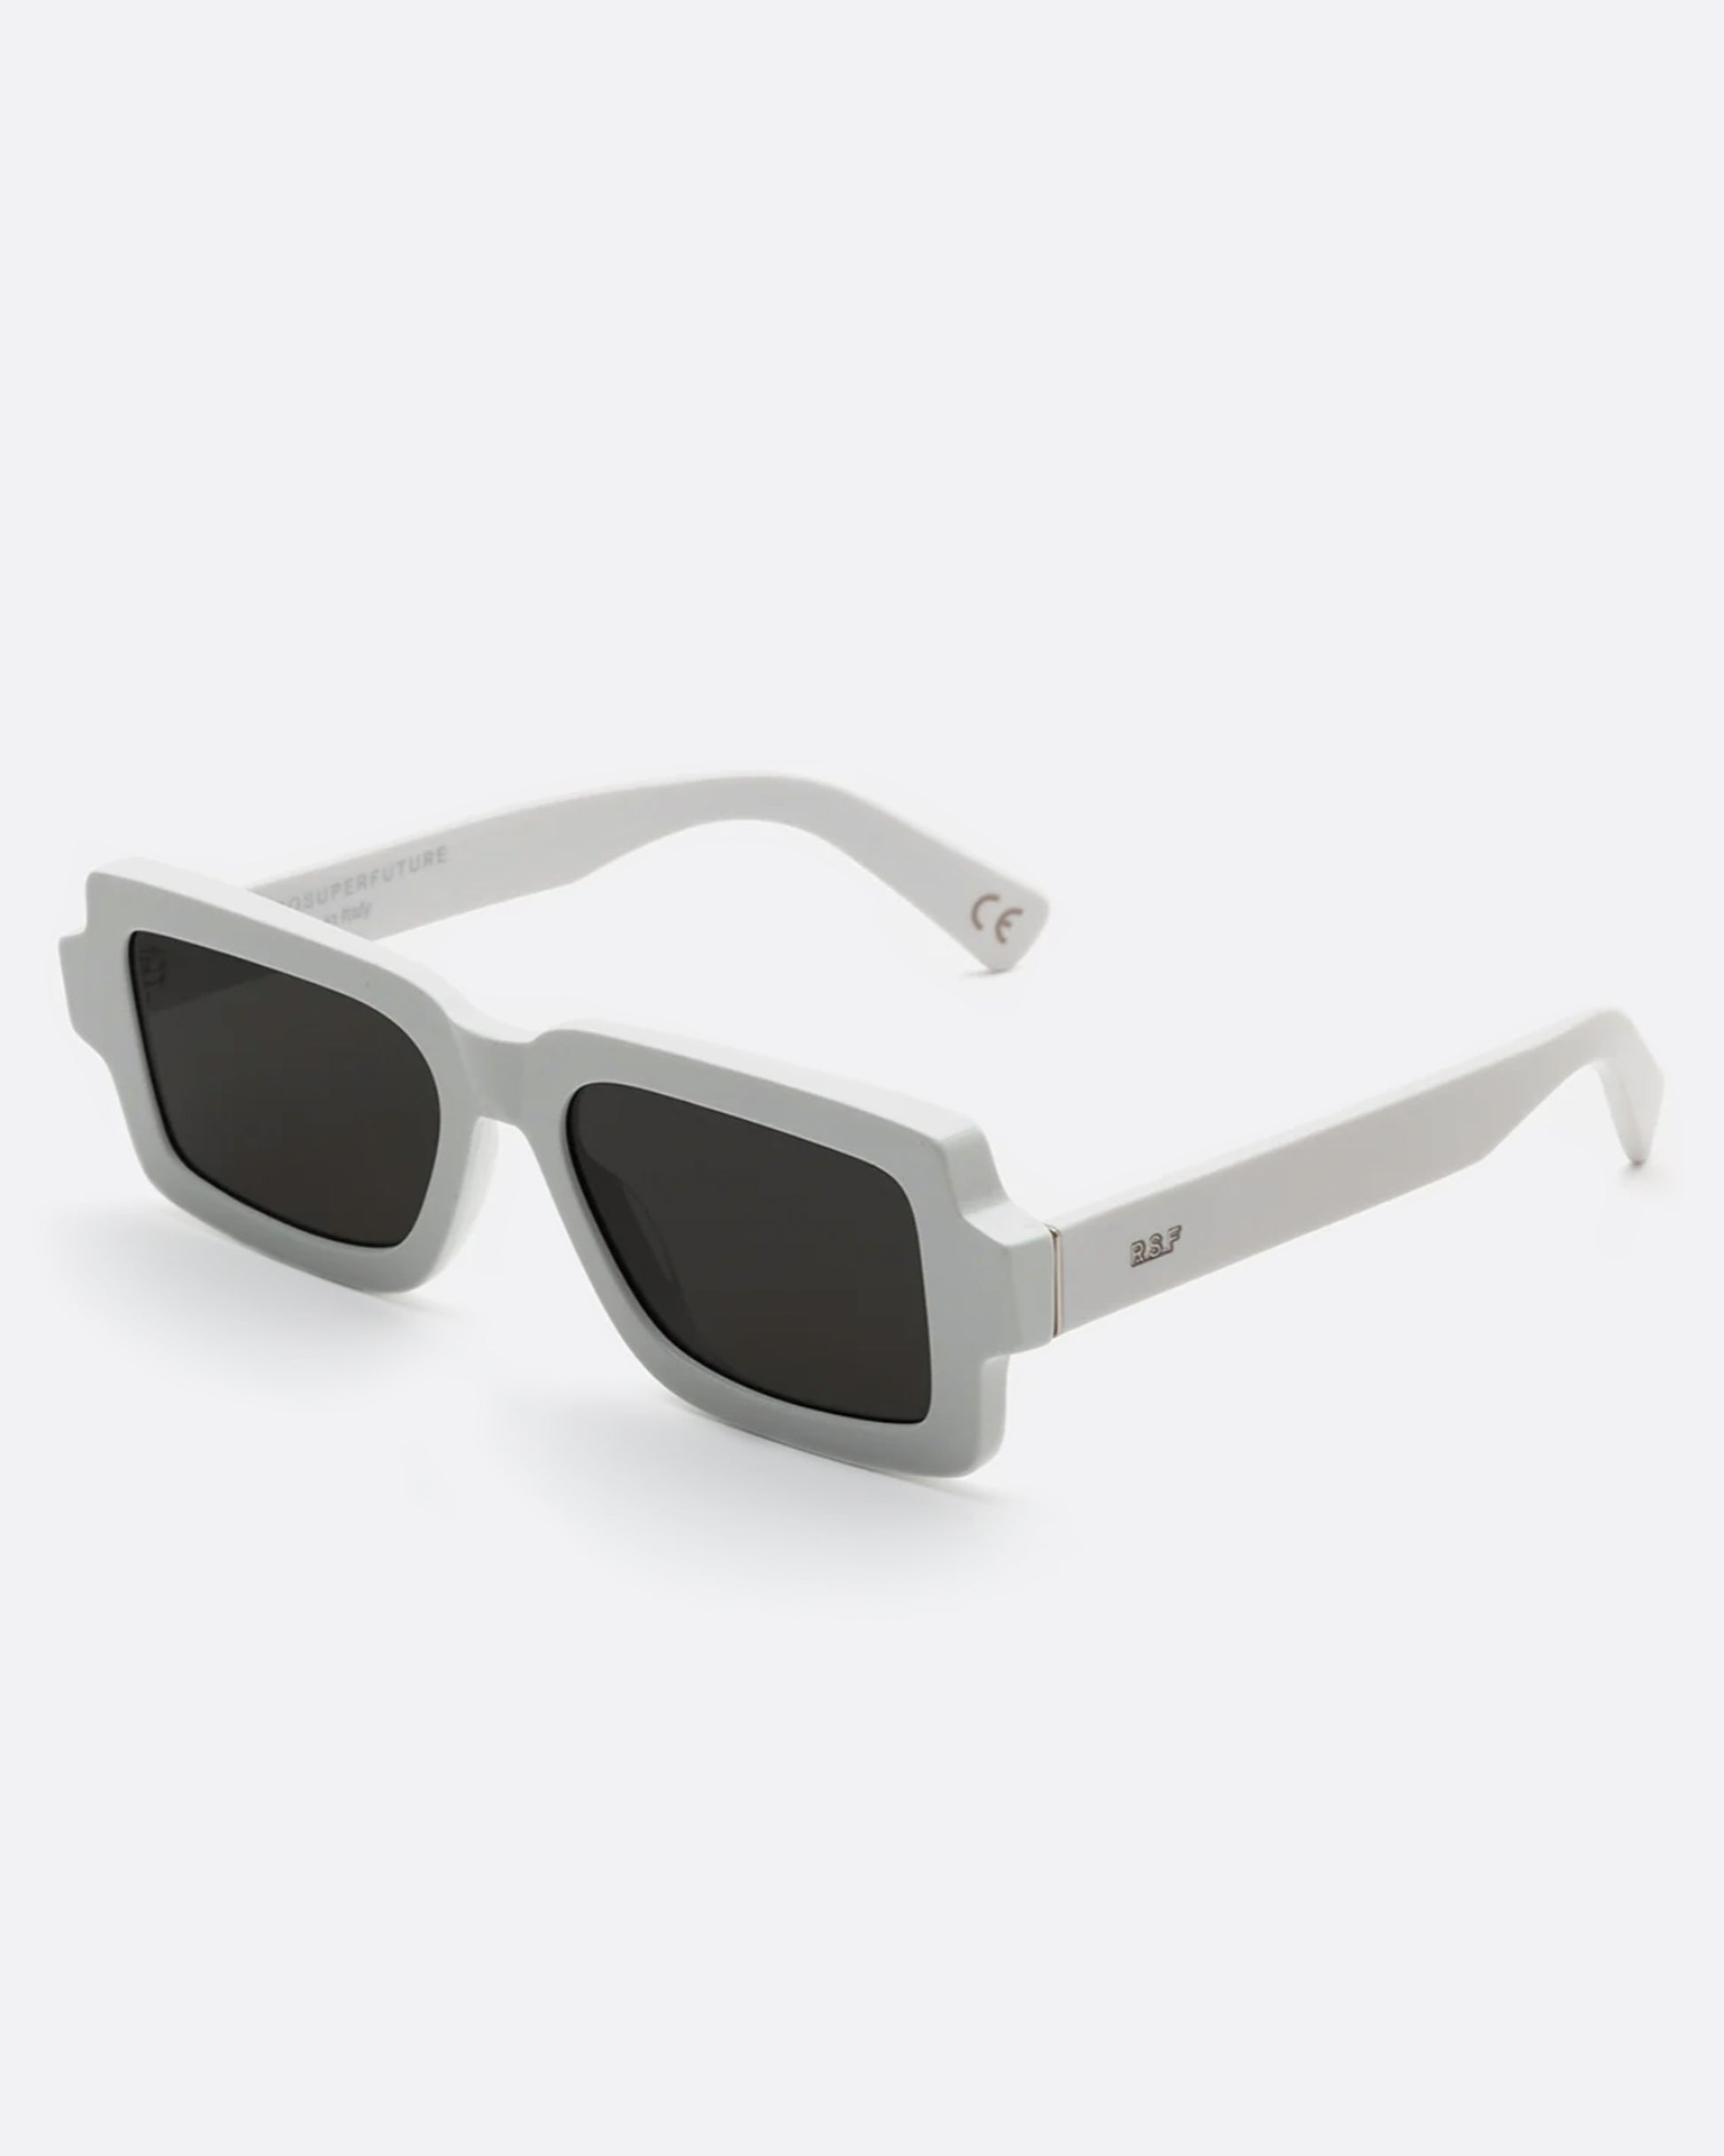 A sharp, contemporary silhouette in solid white acetate.